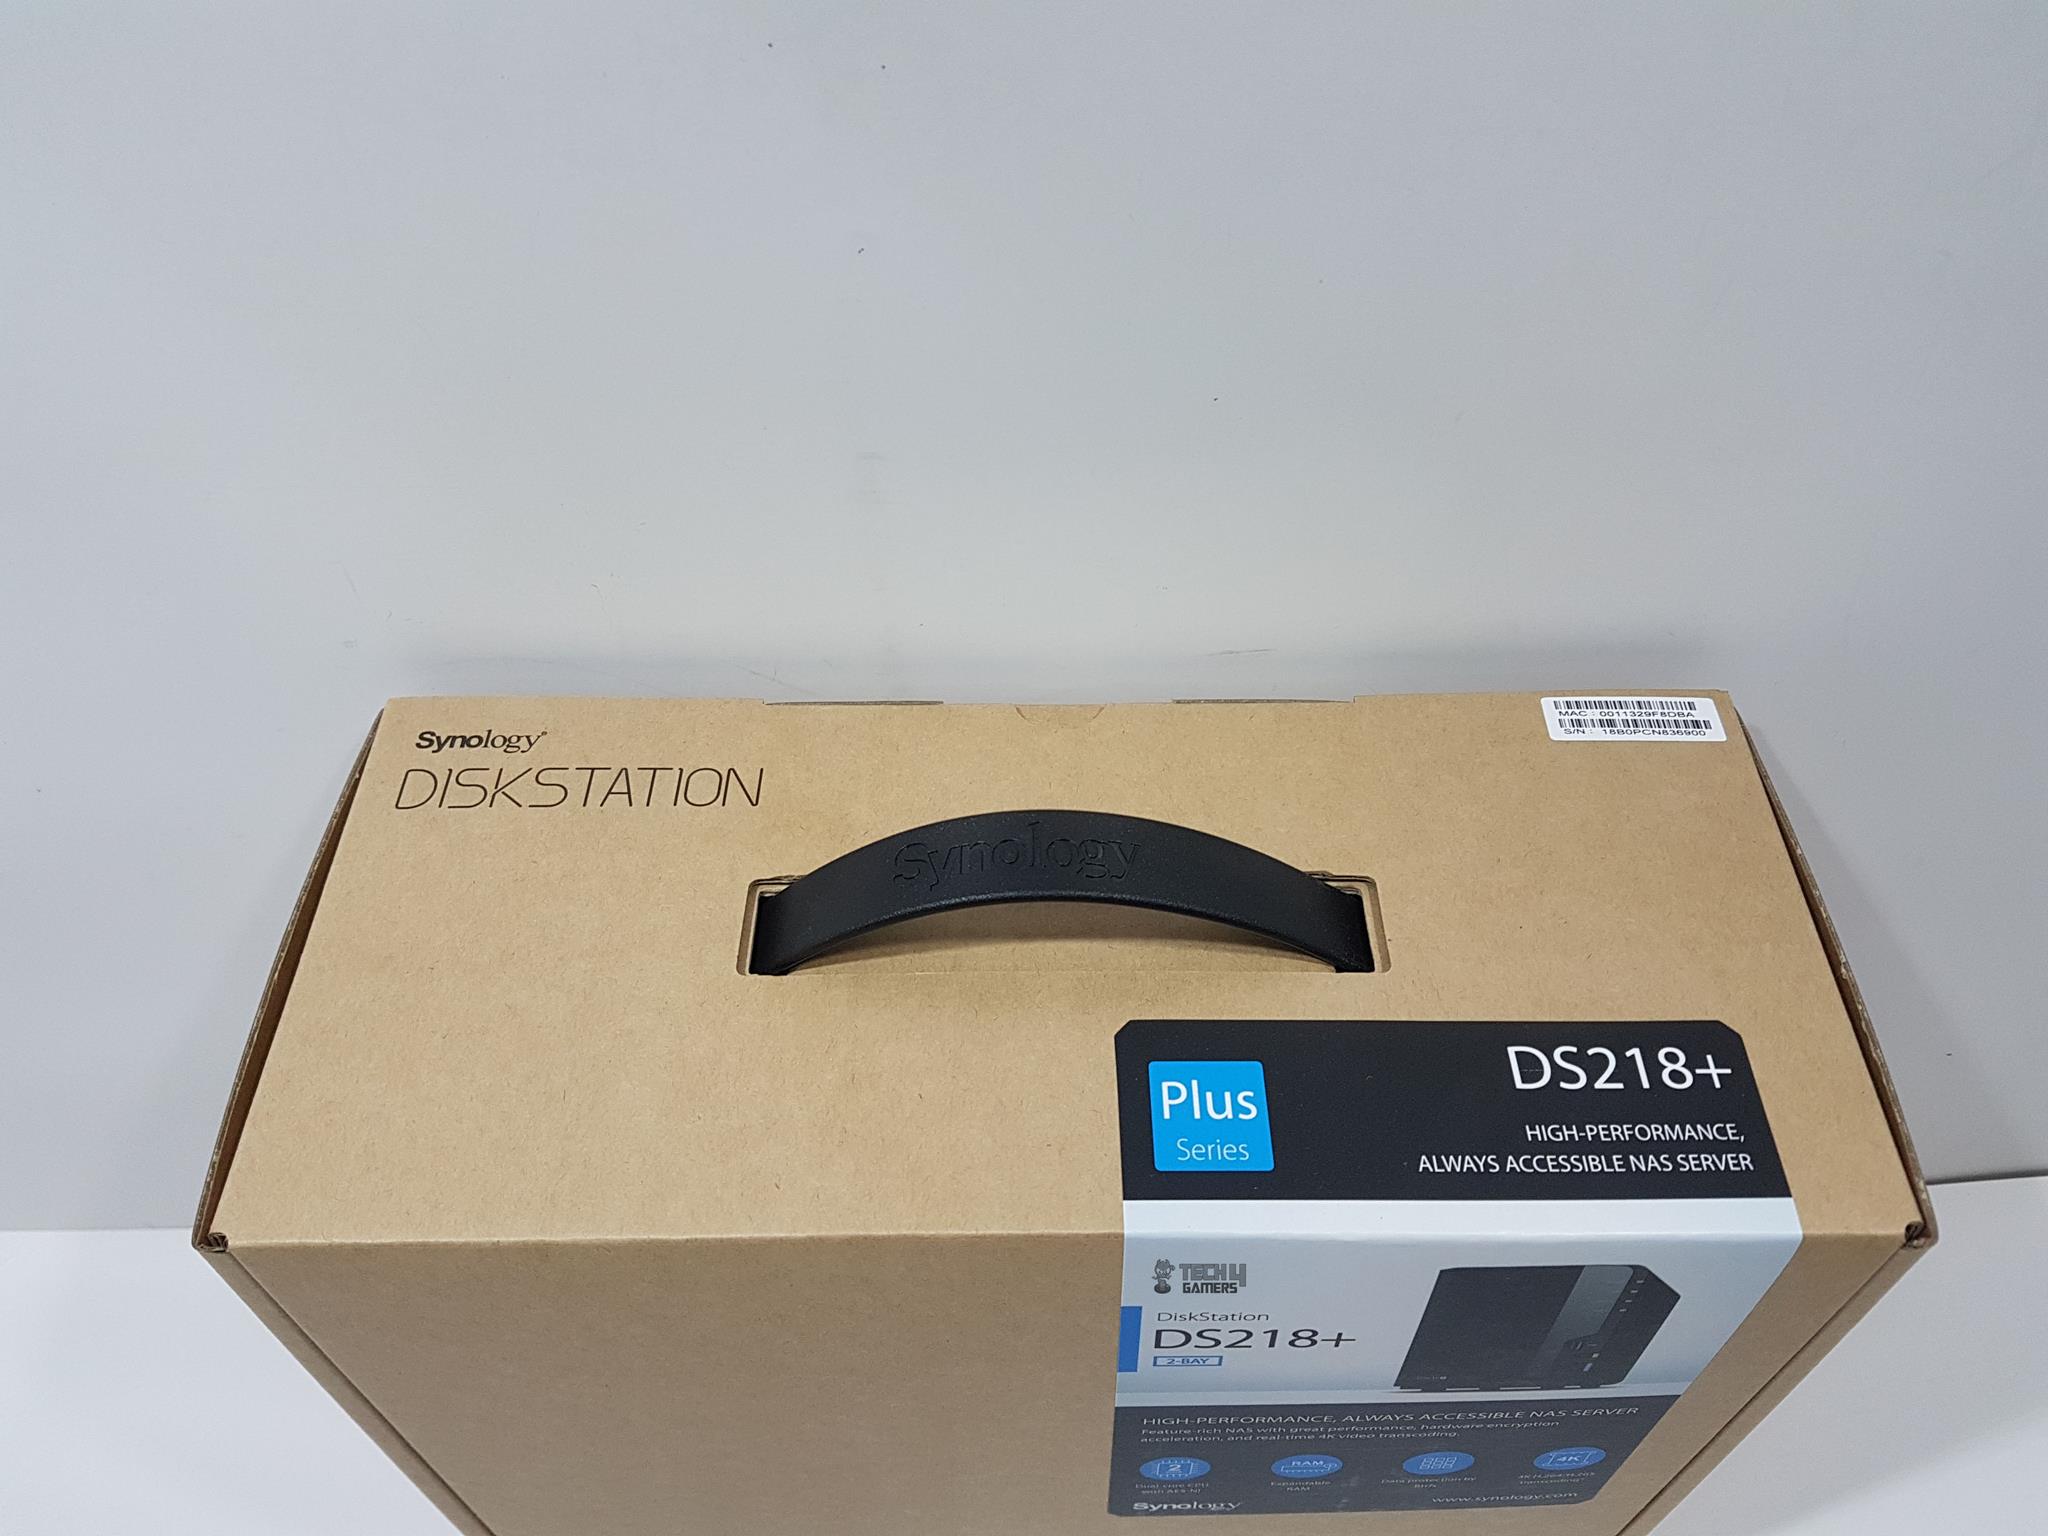 Synology 2 bay Nas Diskstation Ds218+ Top Side Packaging